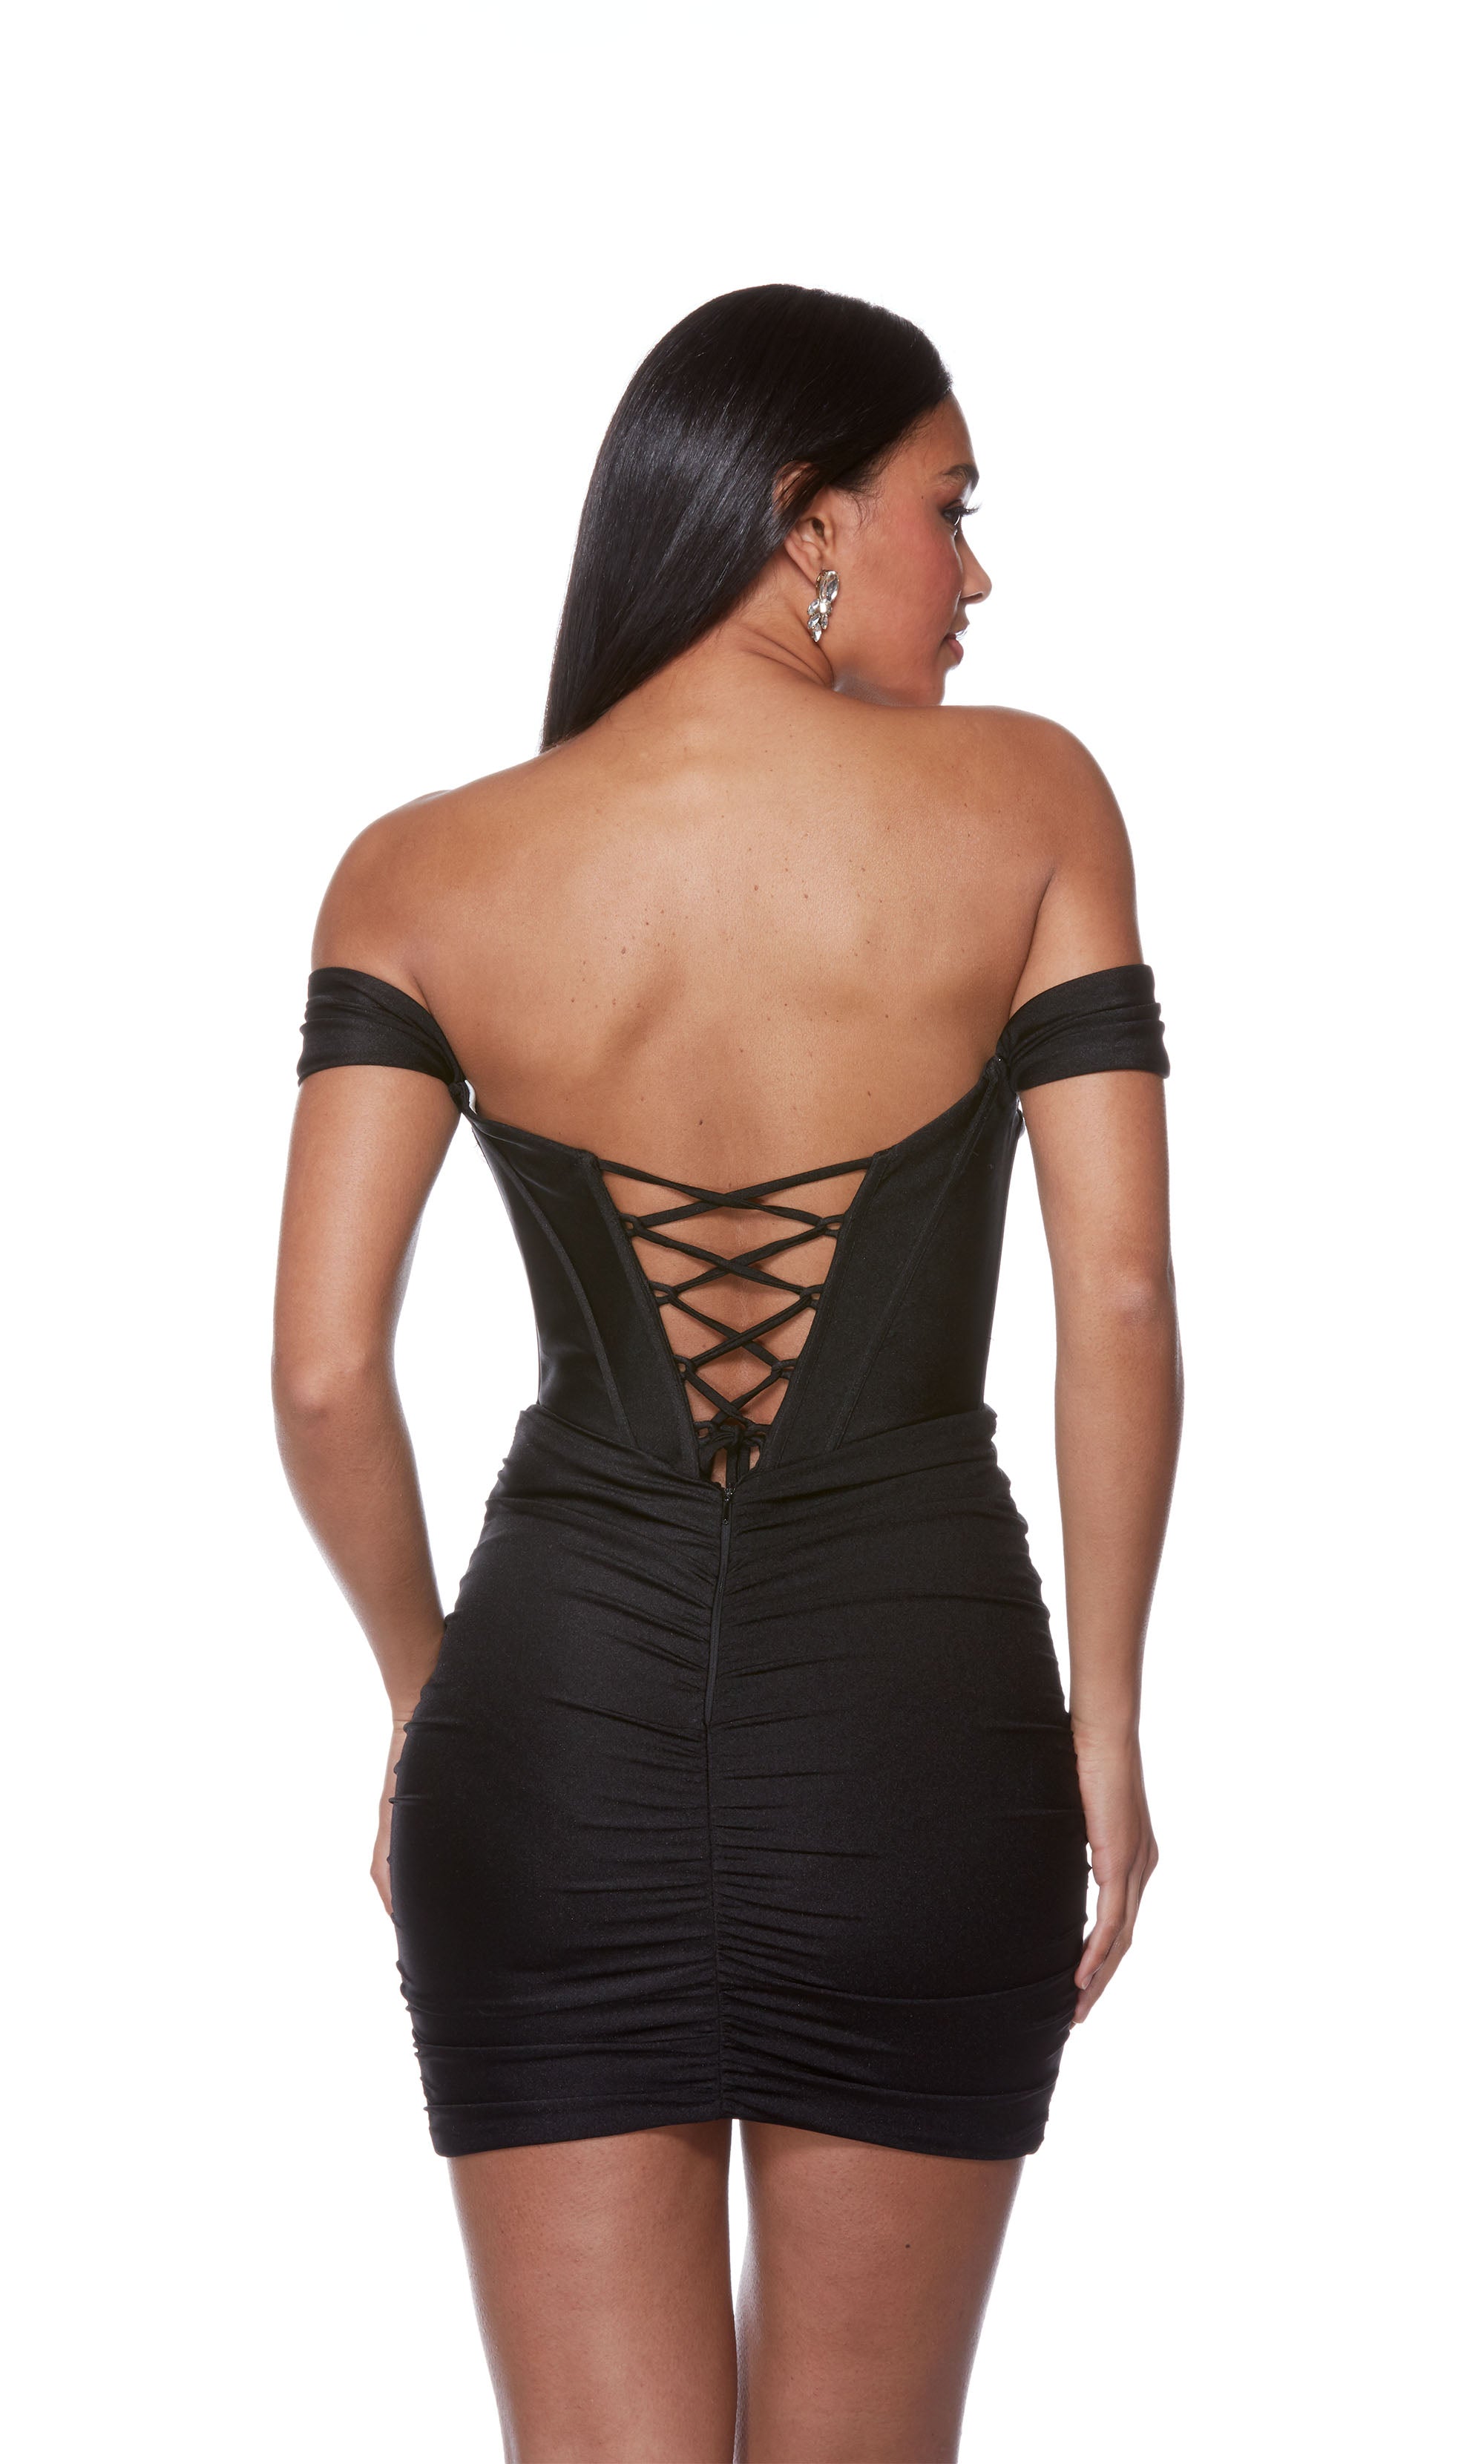 An elegant, off-the-shoulder corset dress in a classic black, perfect for a glamorous night out.